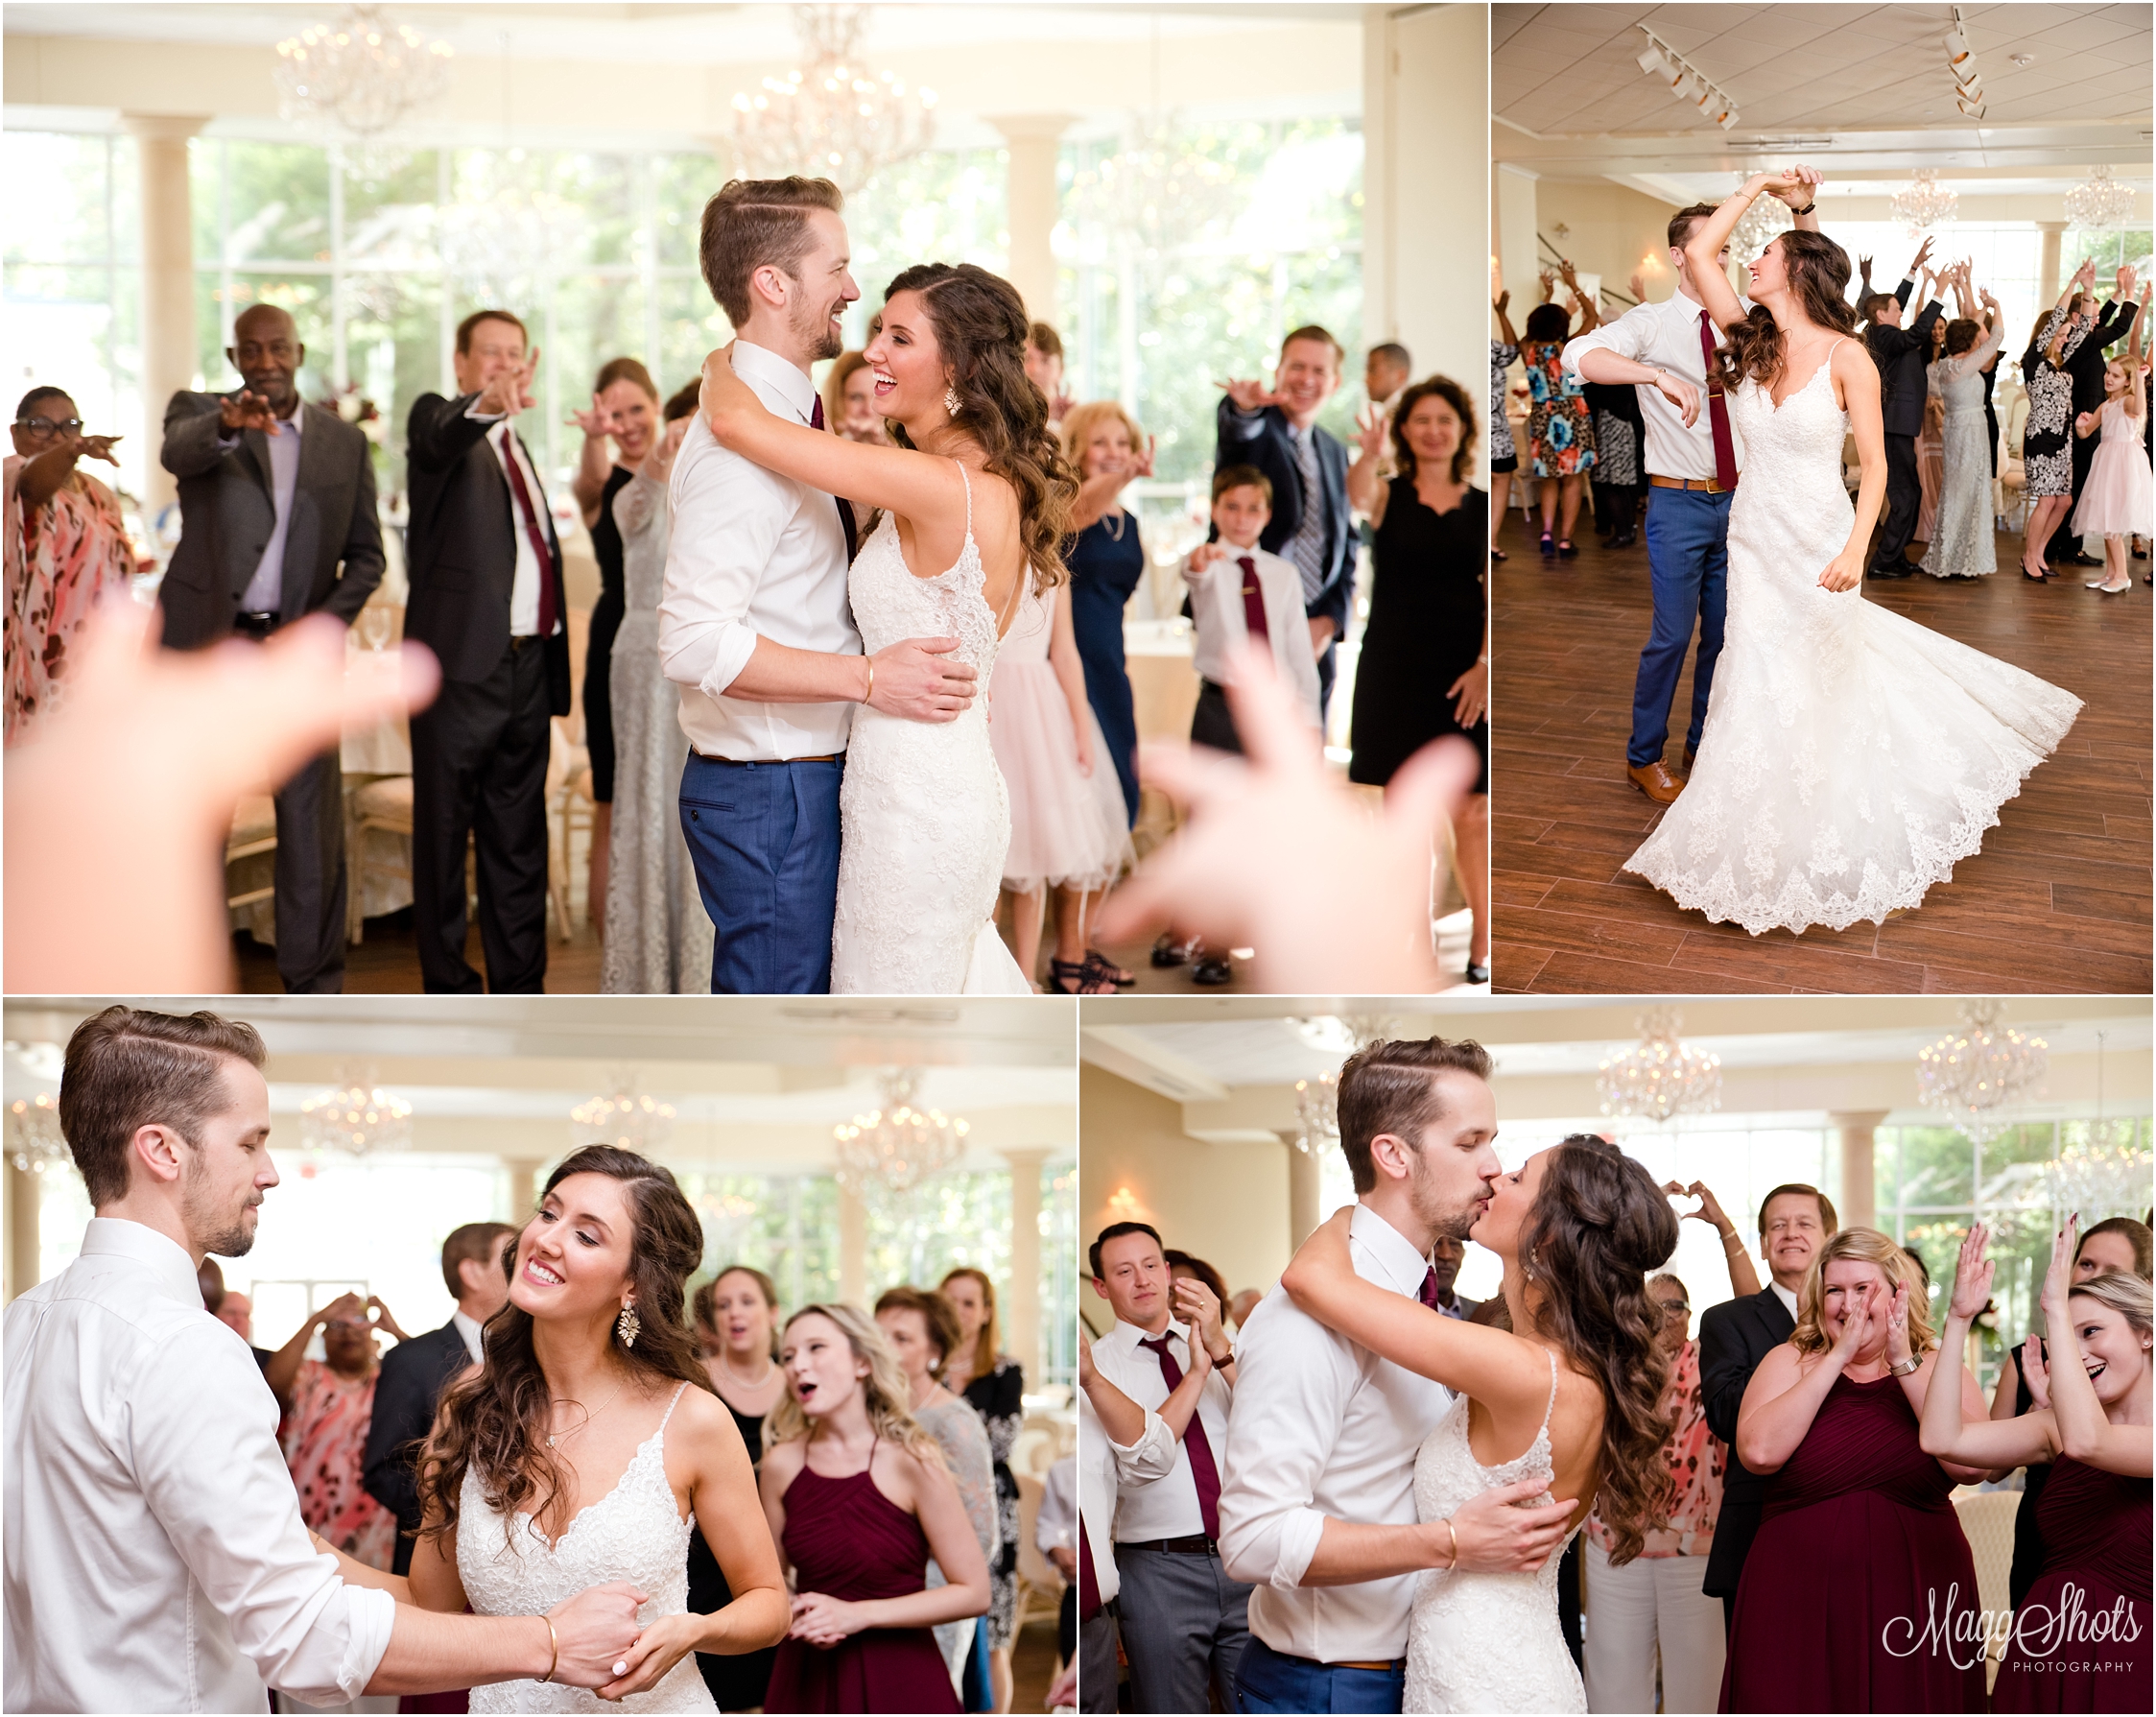 Bride and Groom, Love, Husband and Wife, Dance, Wedding, Professional Photographer, Professional Photography, Beautiful, DFW Wedding Photographer, MaggShots Photography, MaggShots, Dance, Reception